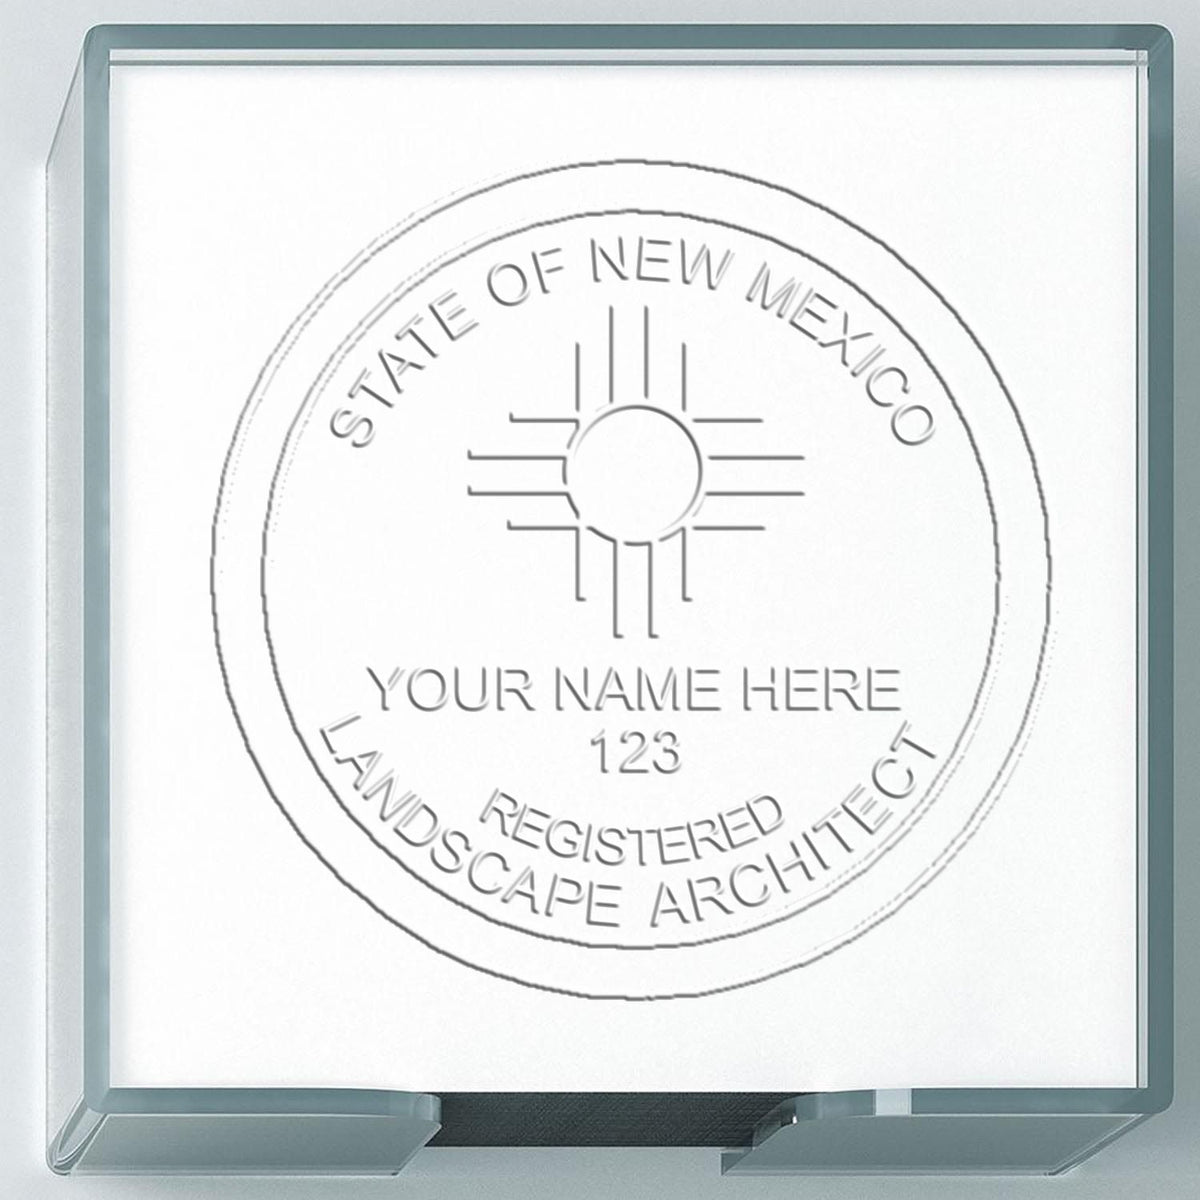 A stamped imprint of the Gift New Mexico Landscape Architect Seal in this stylish lifestyle photo, setting the tone for a unique and personalized product.